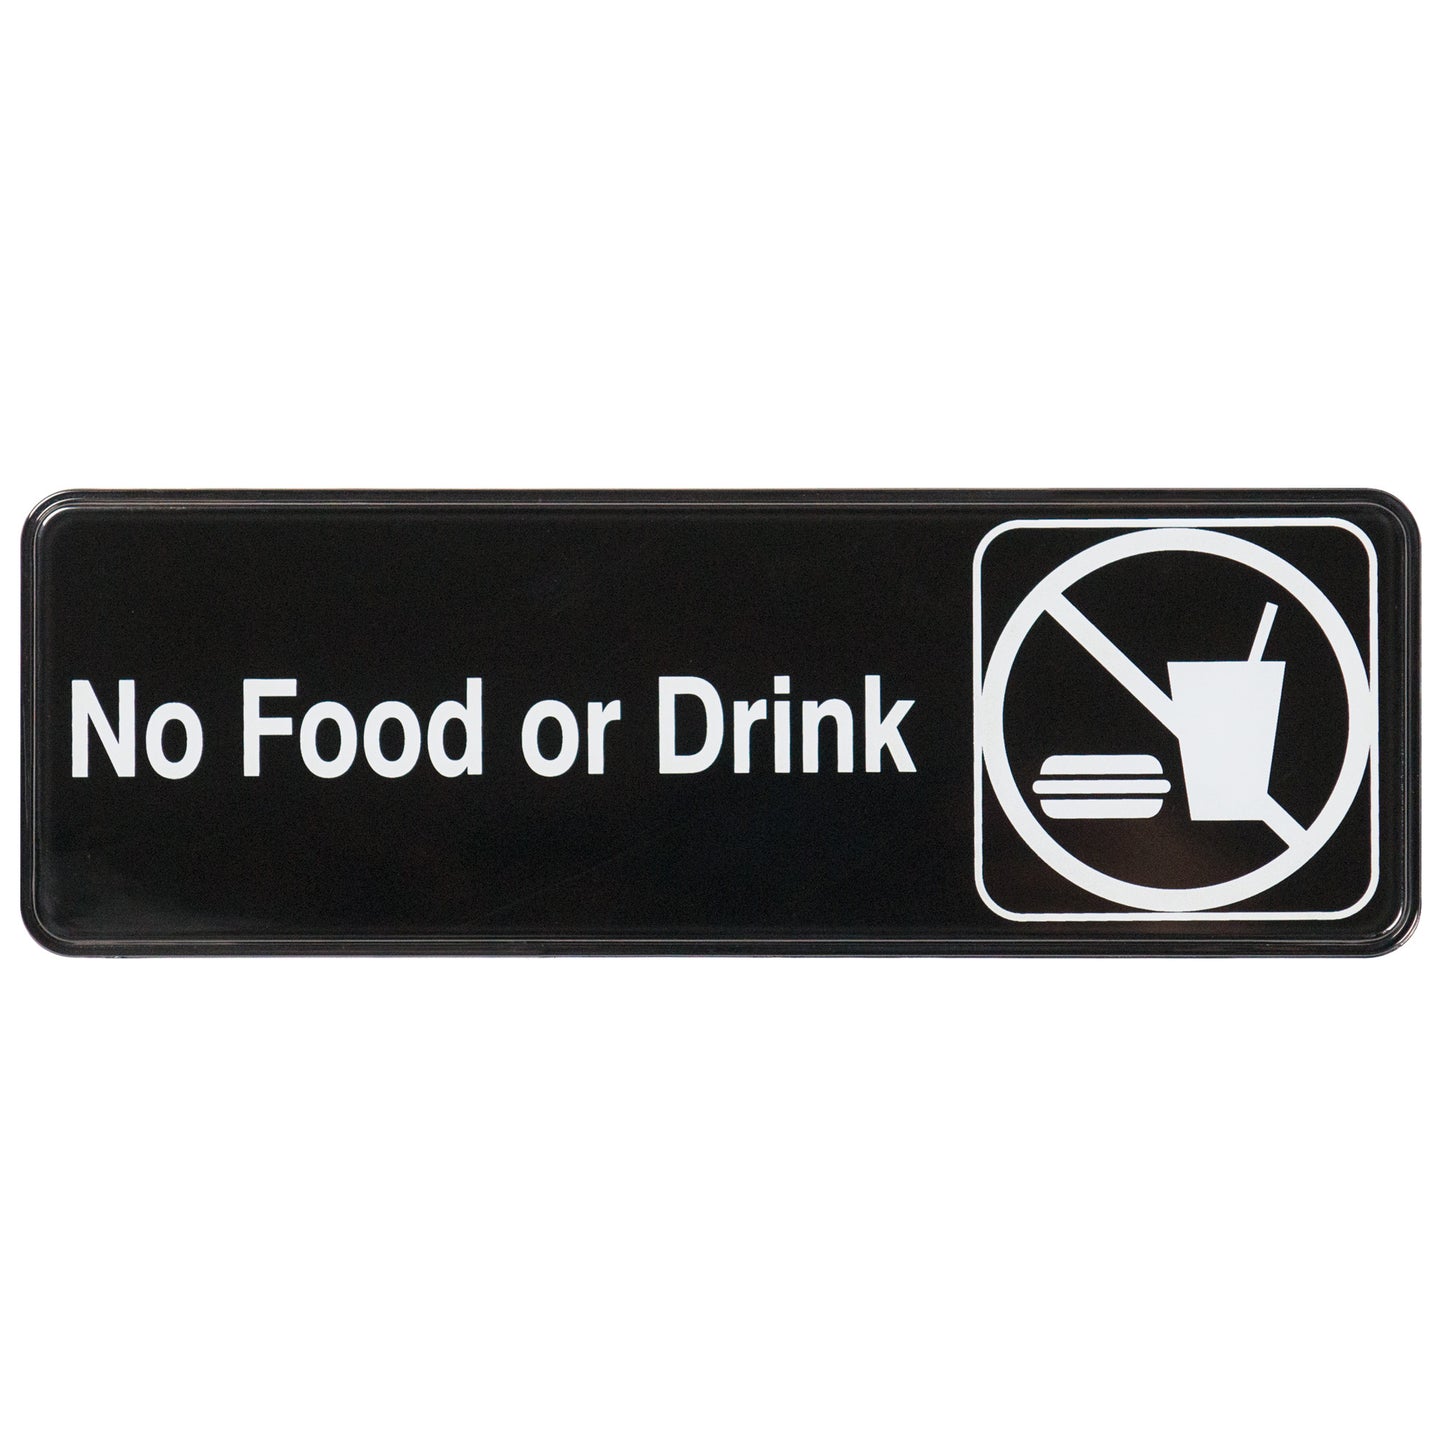 SGN-333 - Information Signs, 9"W x 3"H - SGN-333 - No Food or Drink